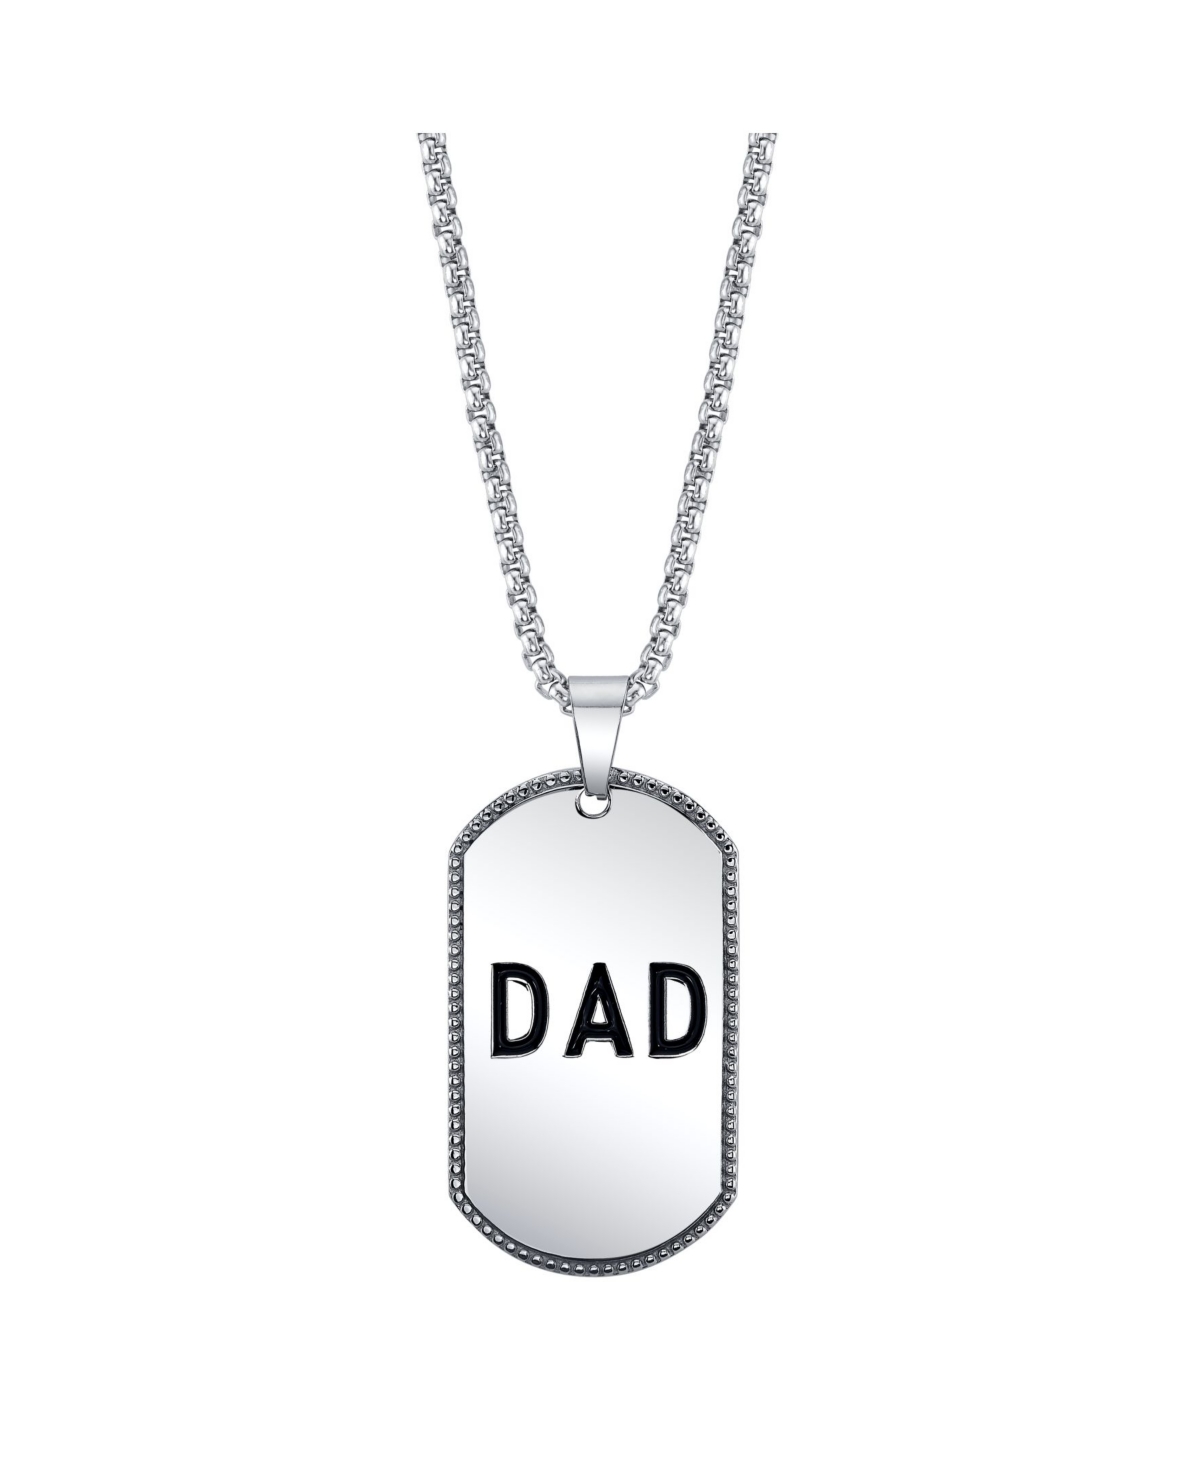 Men's Stainless Steel Dad Pendant Necklace - Silver-Tone